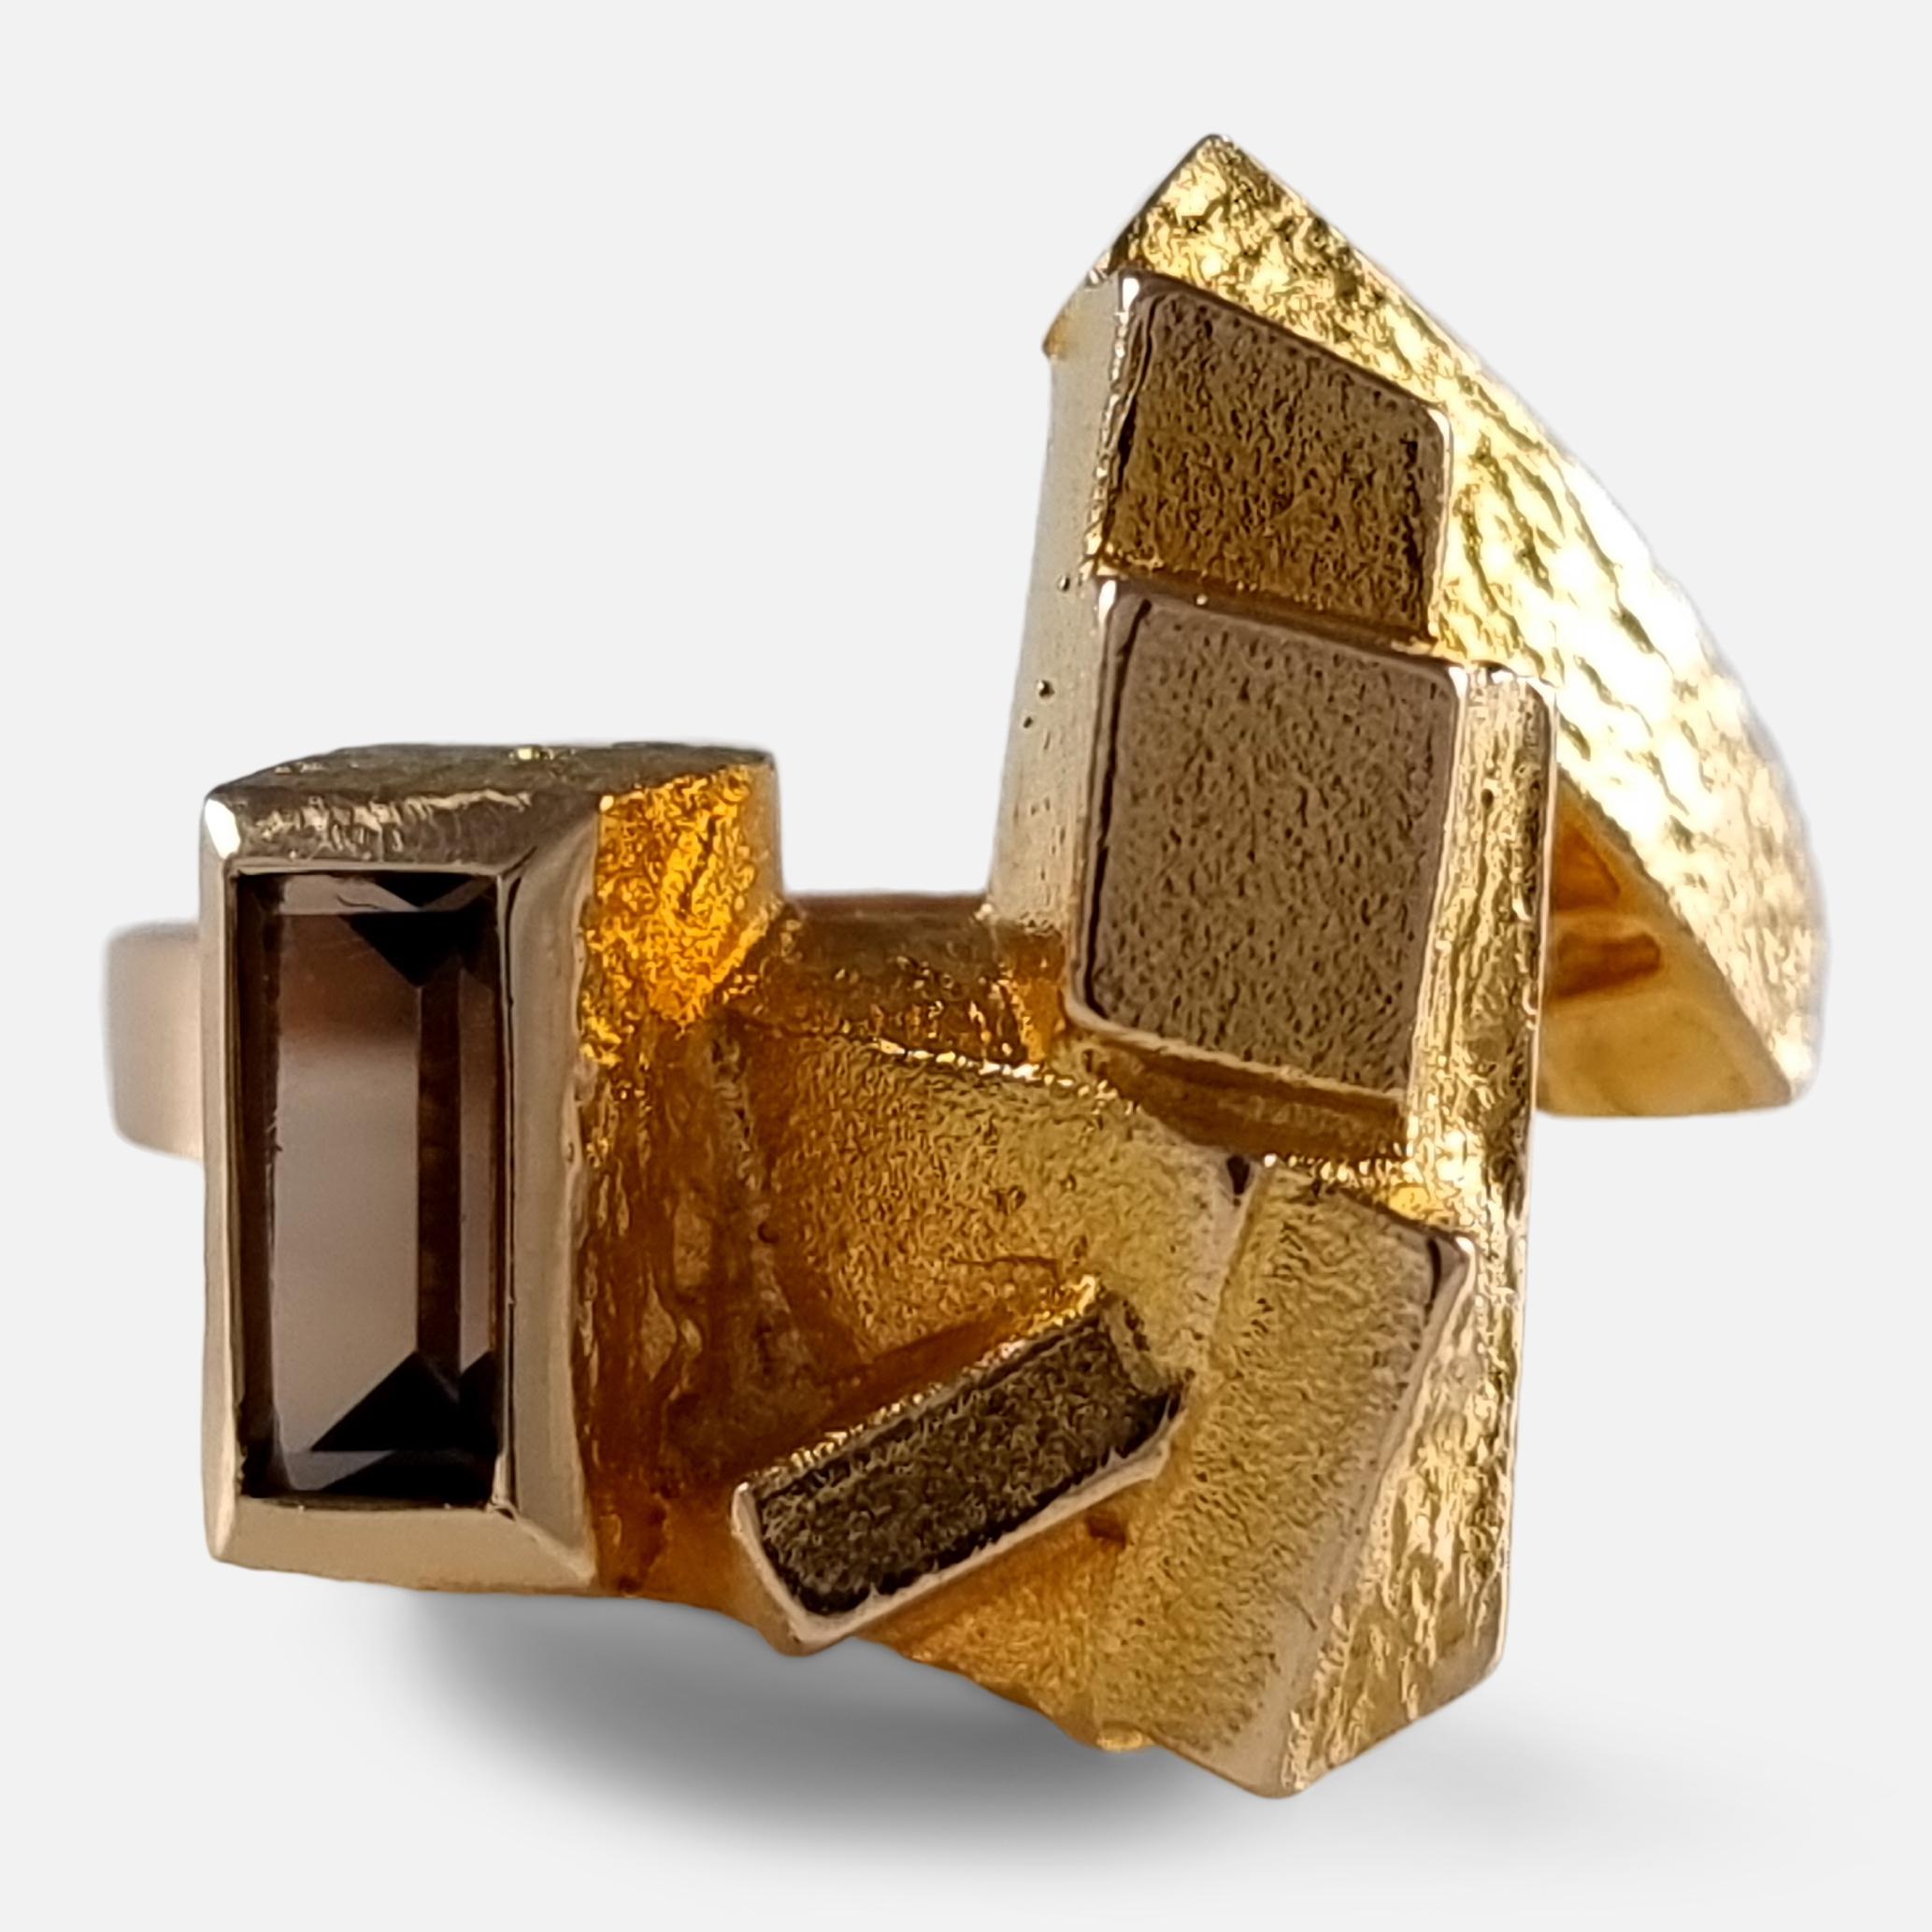 A Finnish 14ct yellow gold smokey quartz modernist ring designed by Björn Weckström for Lapponia.

The ring is hallmarked with the Lapponia makers mark, '585' to denote 14 carat gold, Finnish nation mark, date code 'S7' to denote 1971, 'FINLAND', &